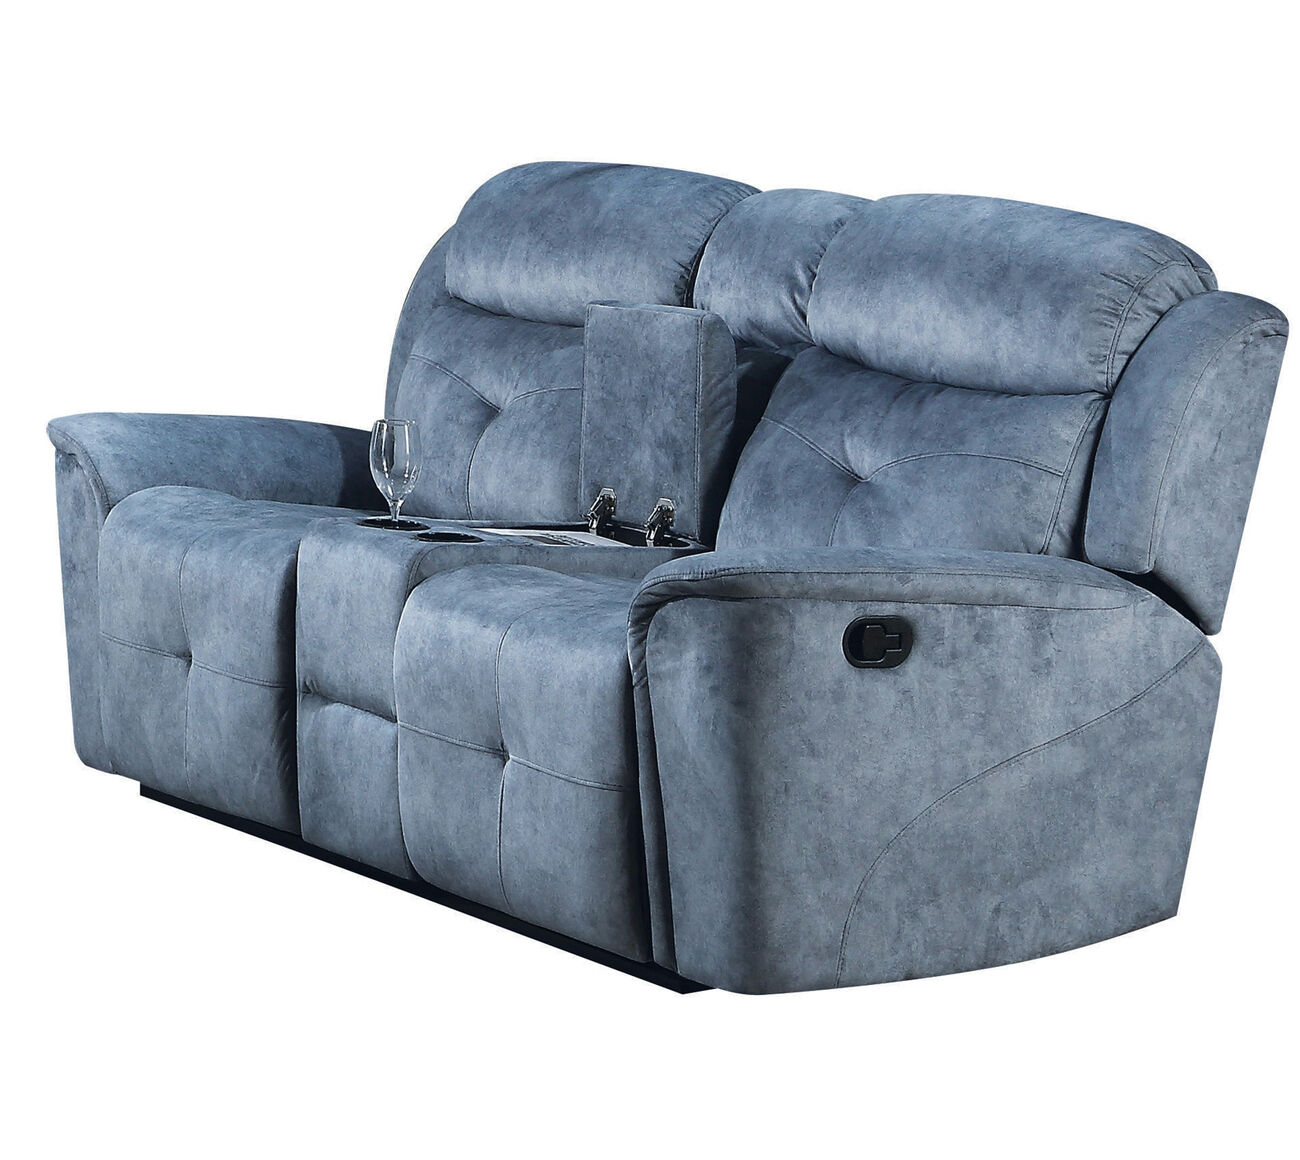 Fabric Upholstered Recliner Loveseat with Tufted Details, Blue